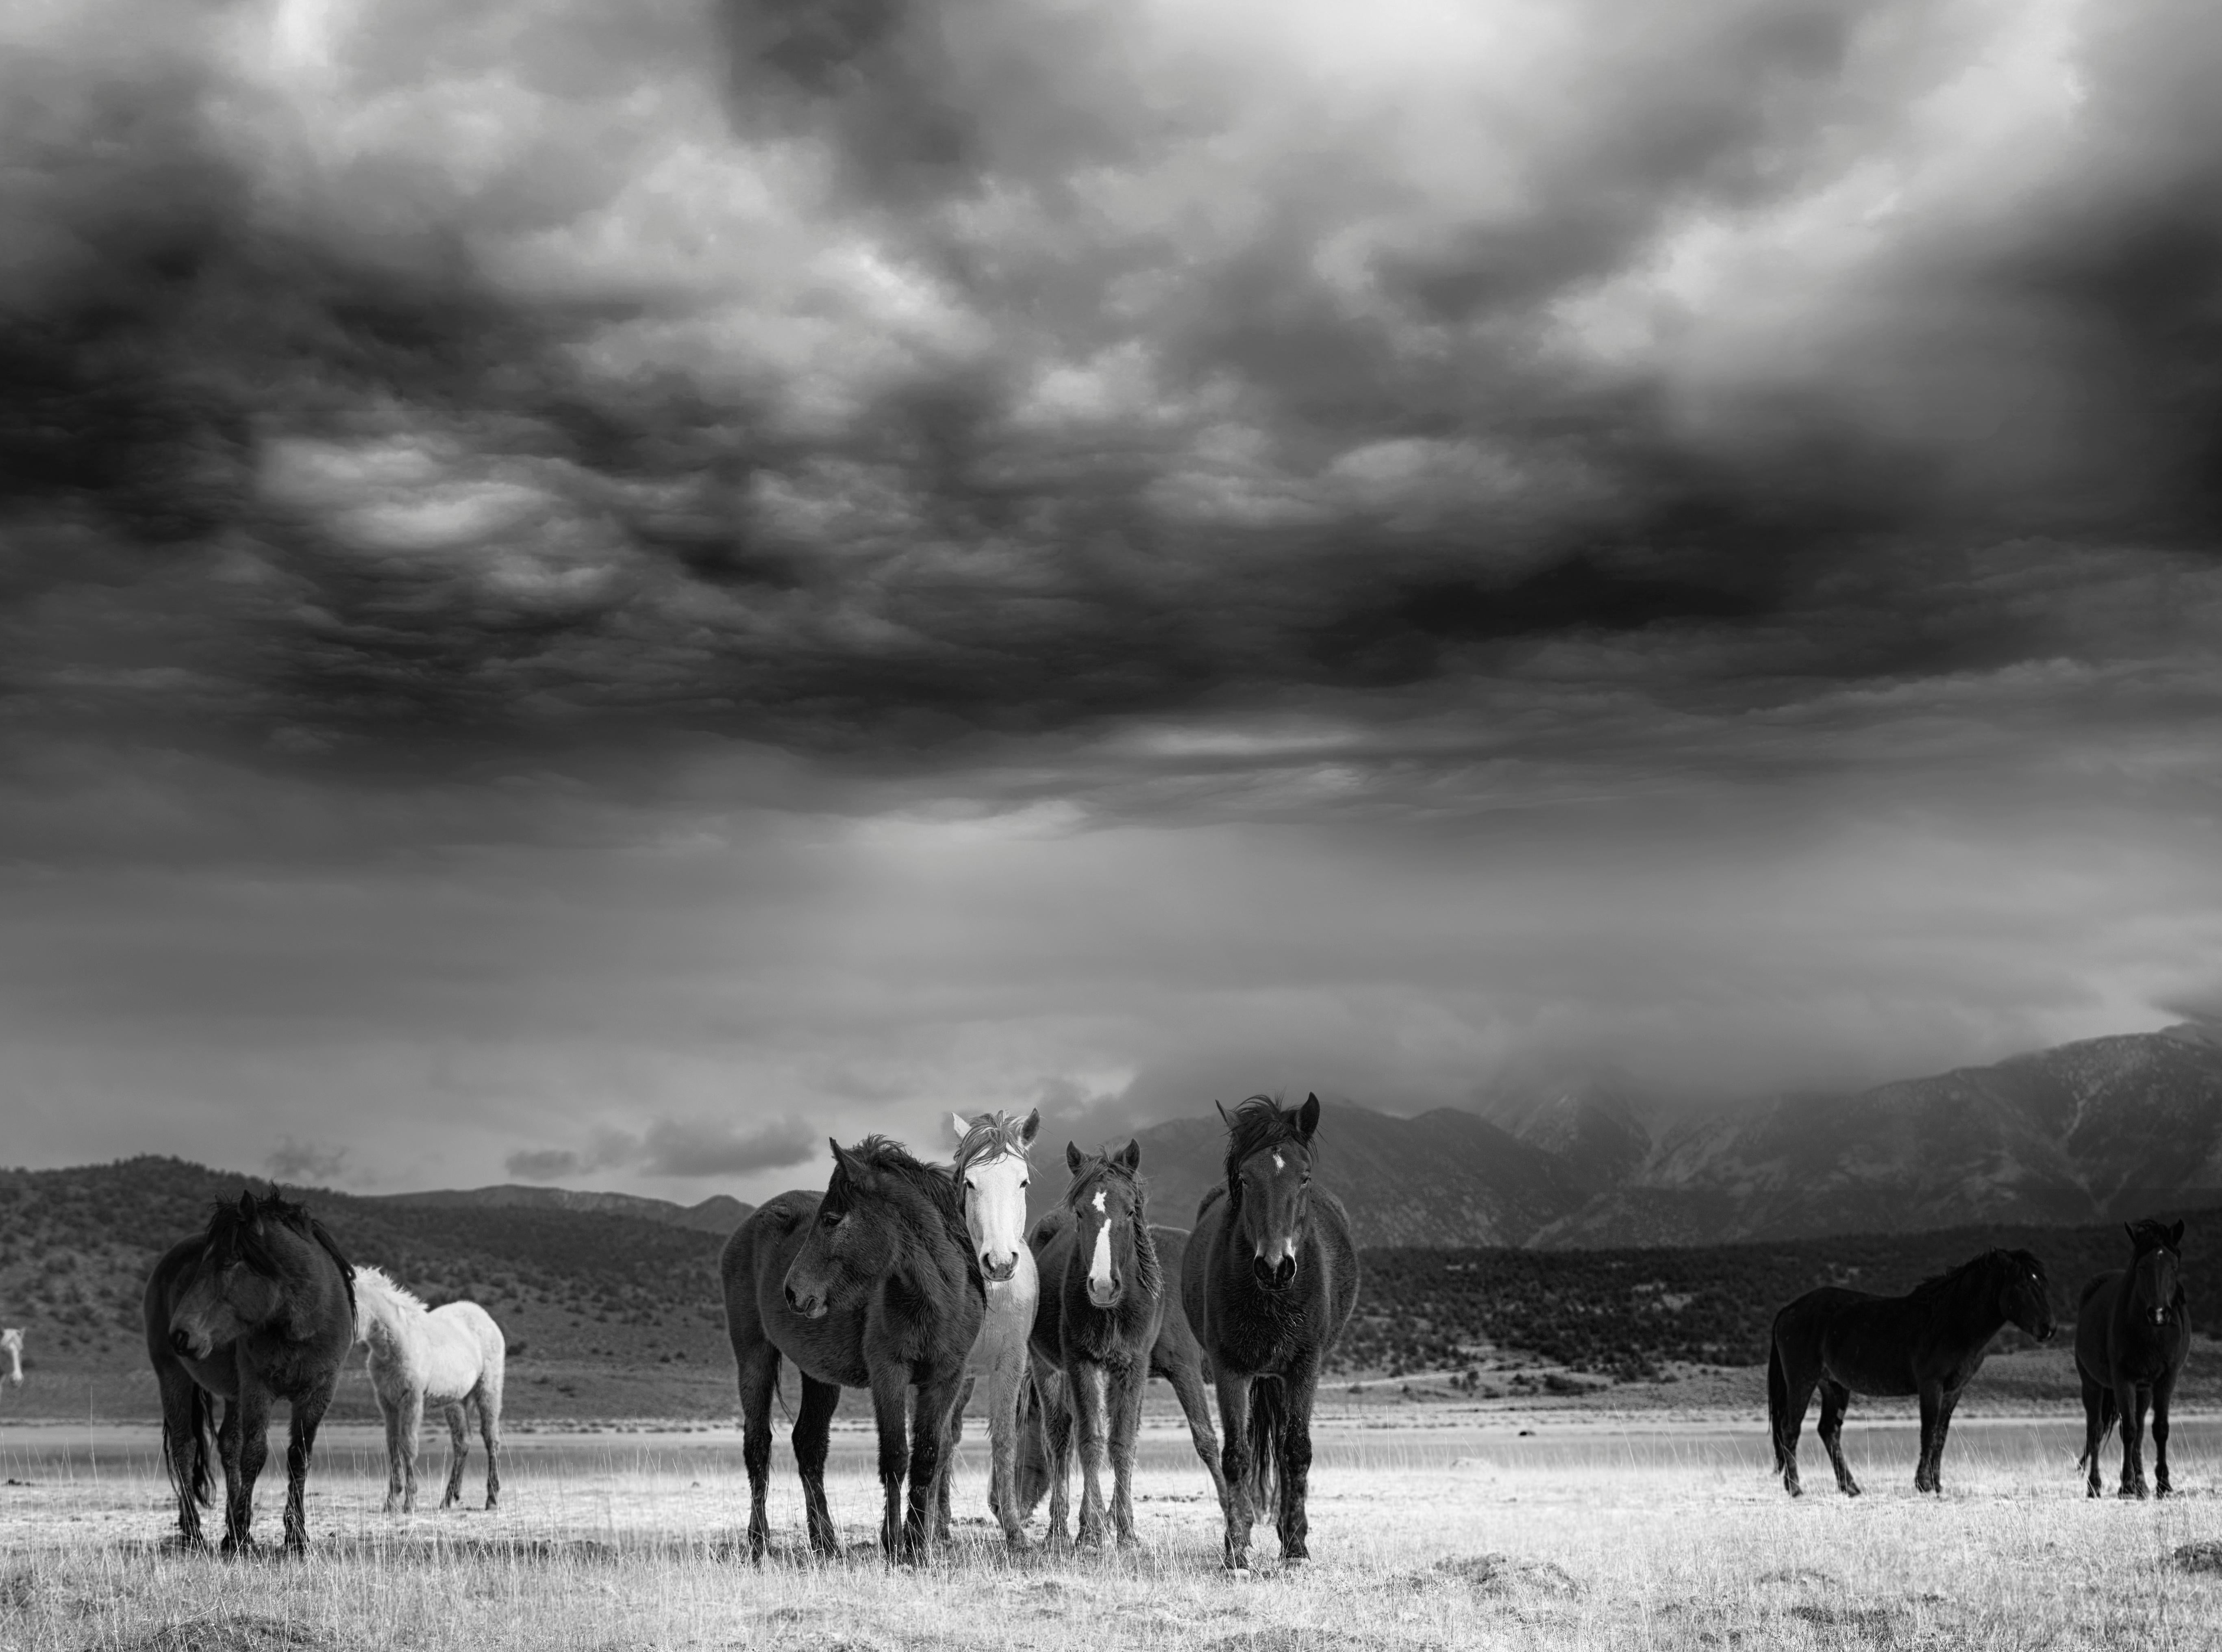 Shane Russeck Landscape Photograph - The Calm - Photography of Wild Horses(Special 1stdibs Price)